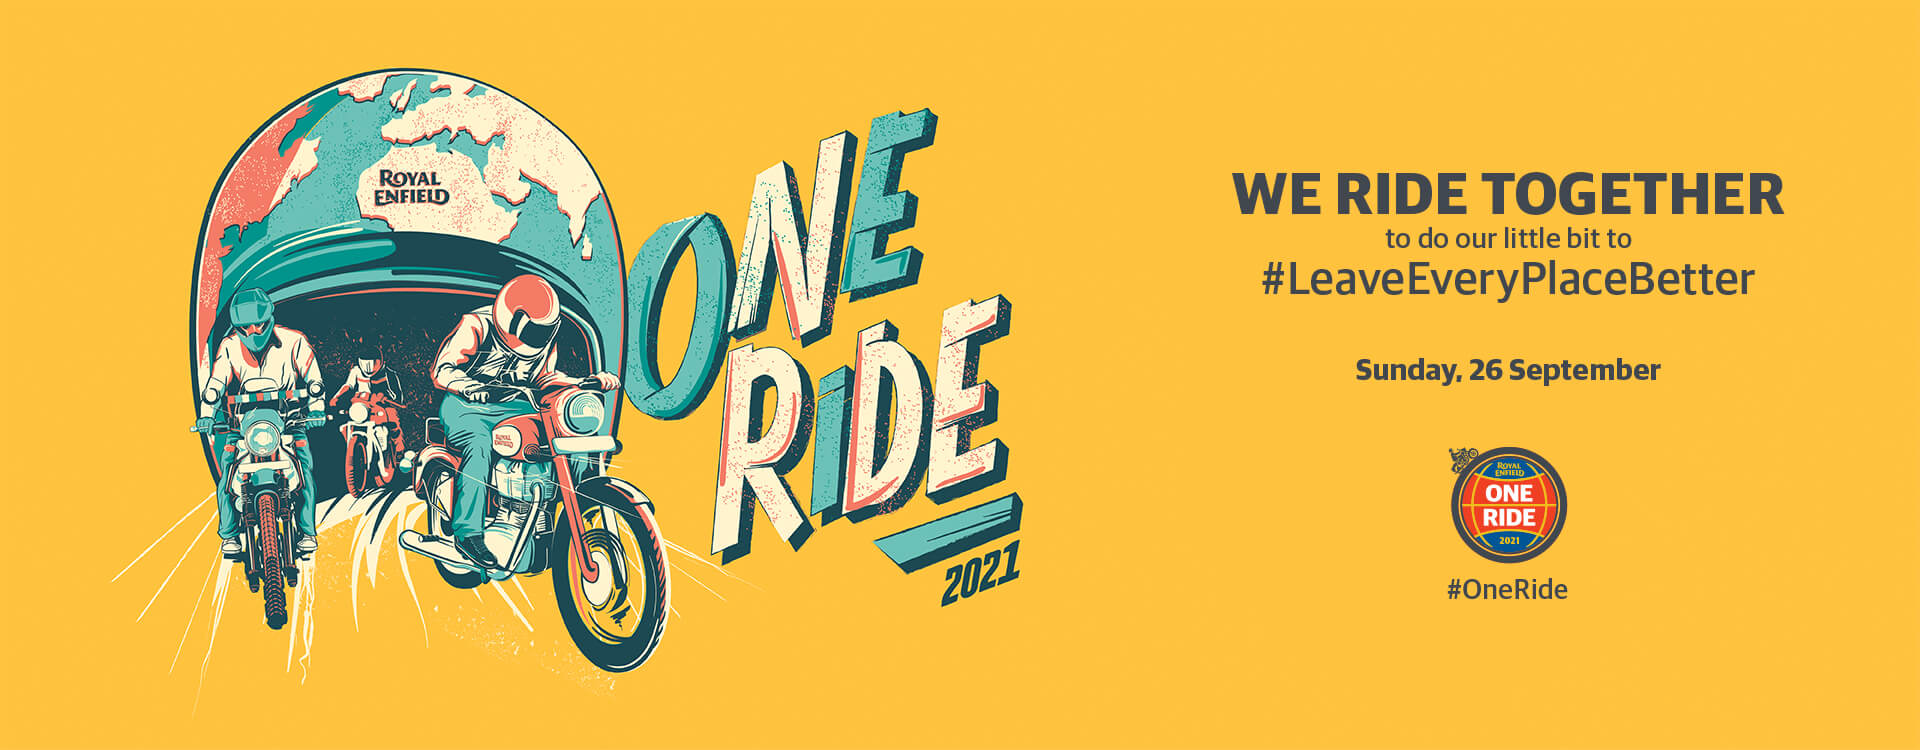 One Ride 2021 Largest Annual Motorcycle Ride Event Royal Enfield